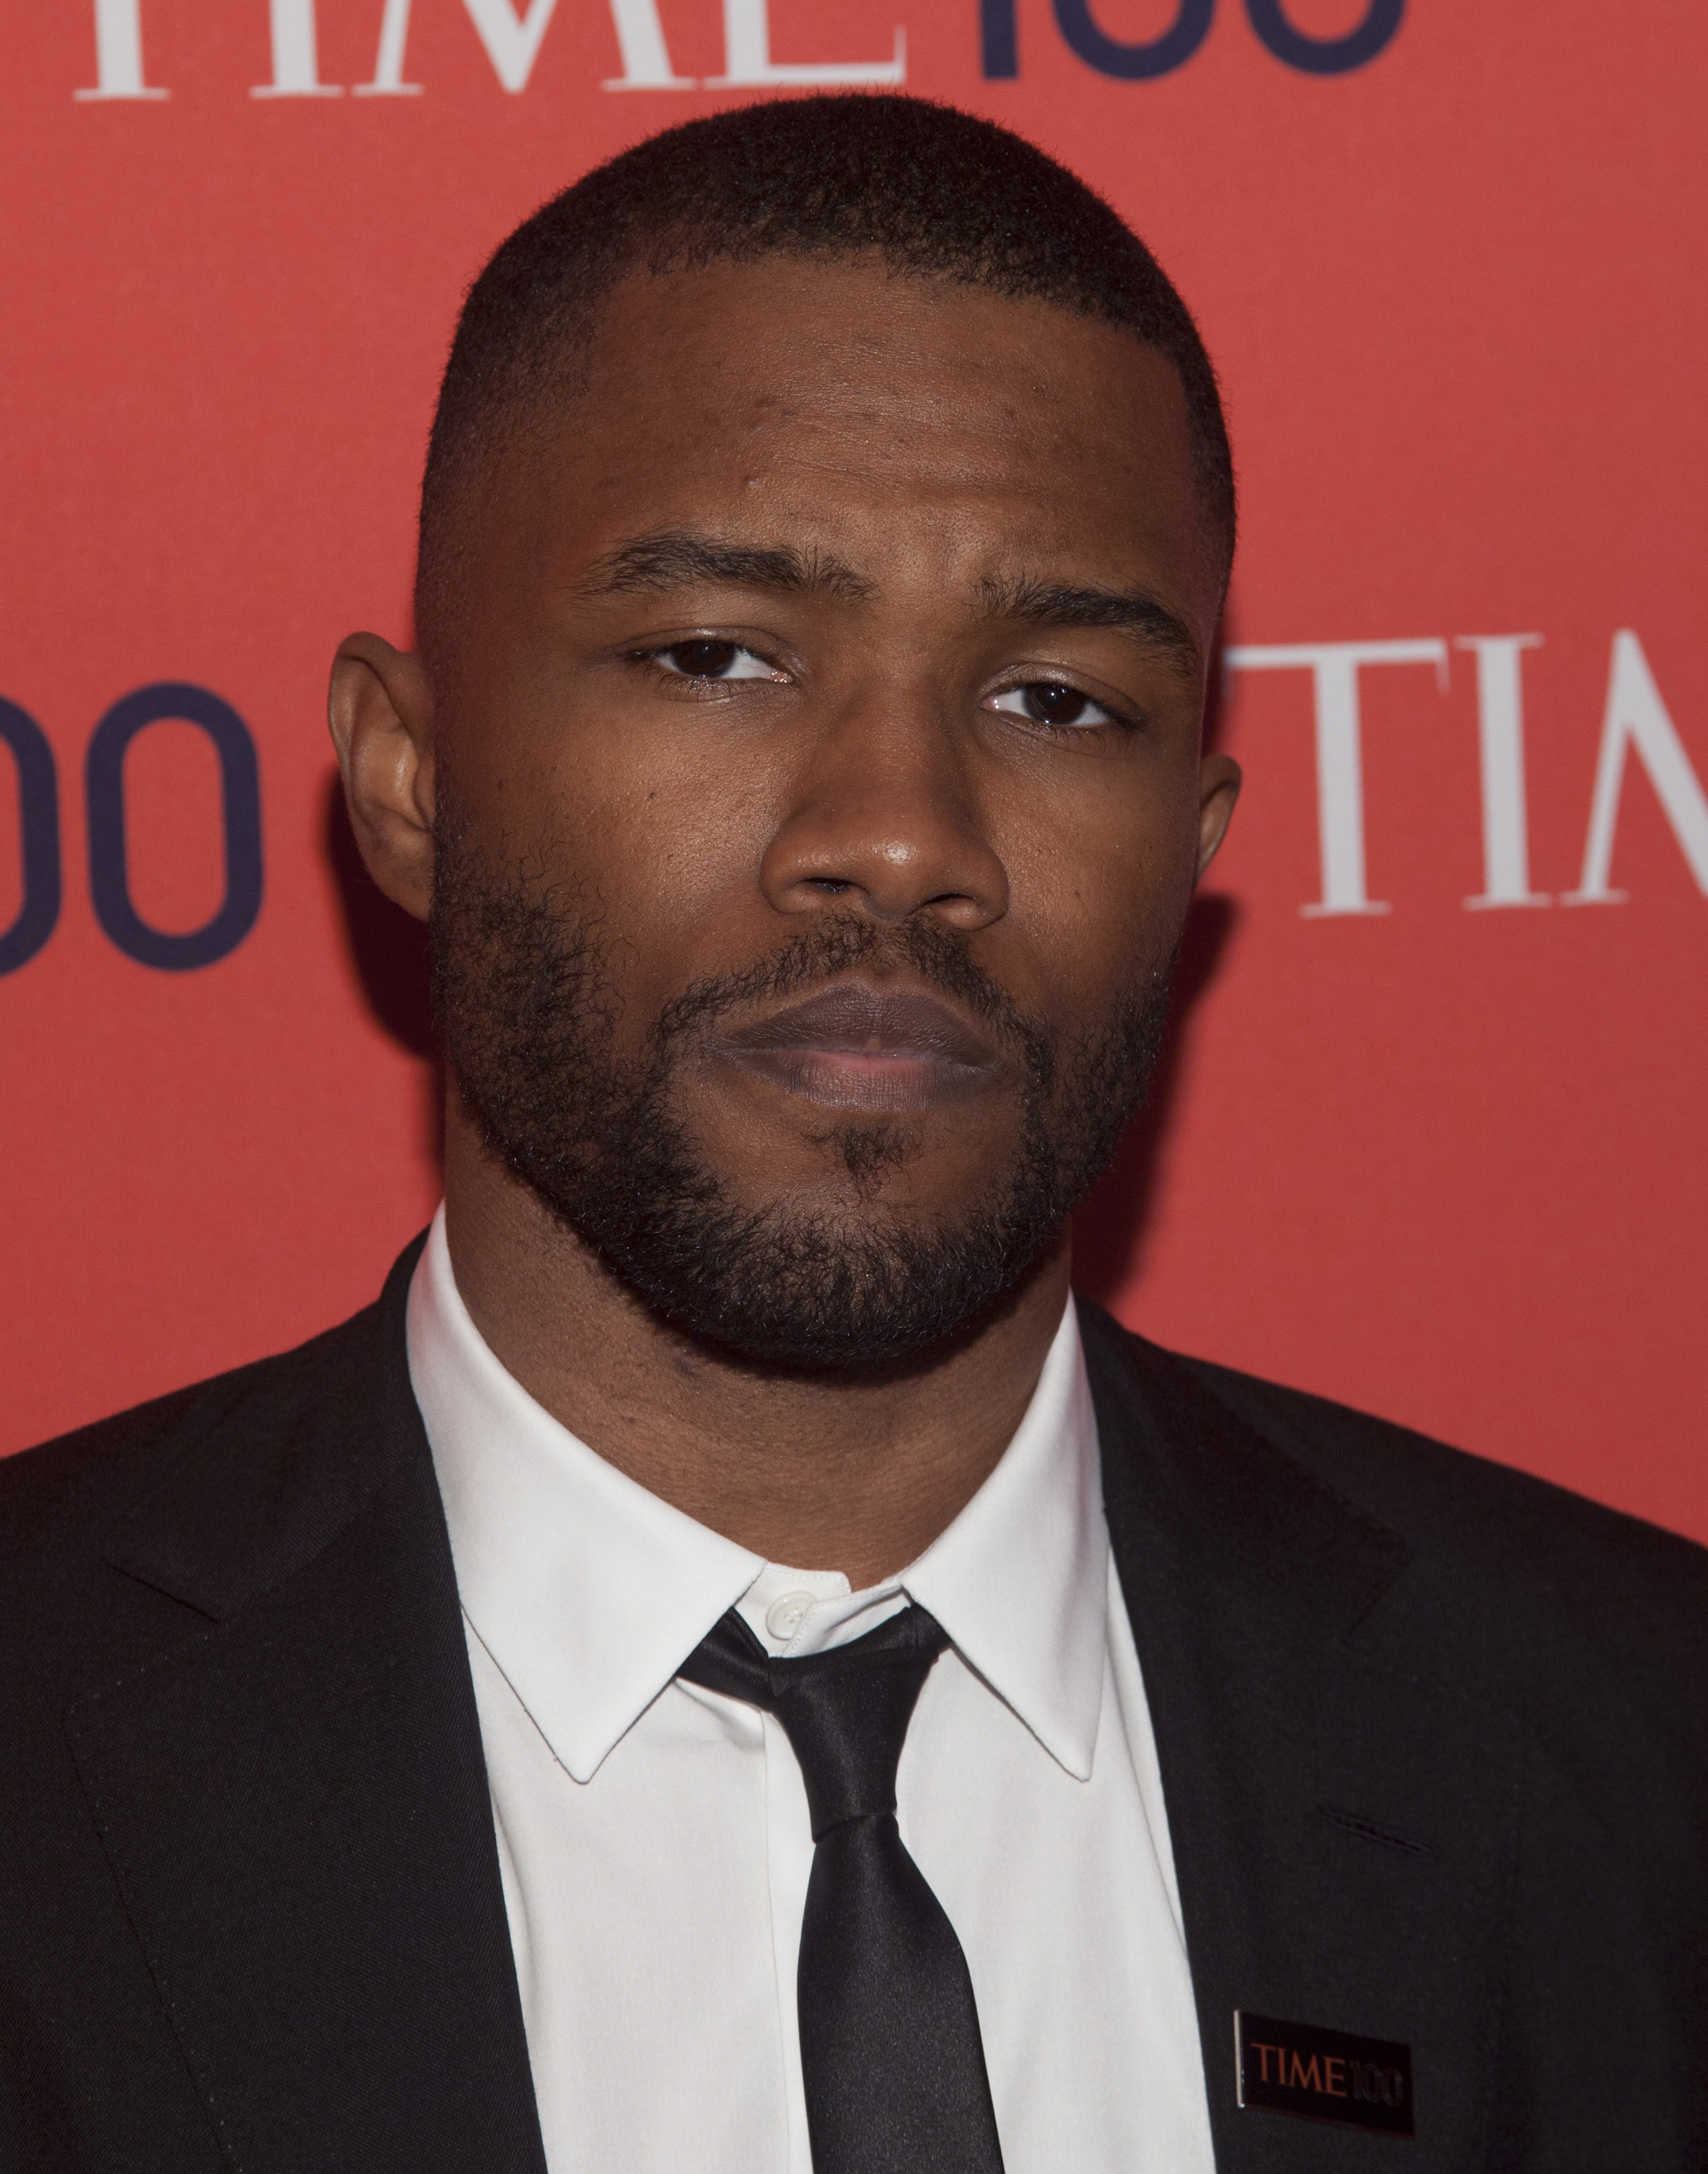 Frank Ocean attends the "TIME 100 Gala, TIME's 100 Most Influential People In The World" at the Frederick P Rose Hall at Lincoln Center on April 29, 2014 in New York City | Source: Getty Images